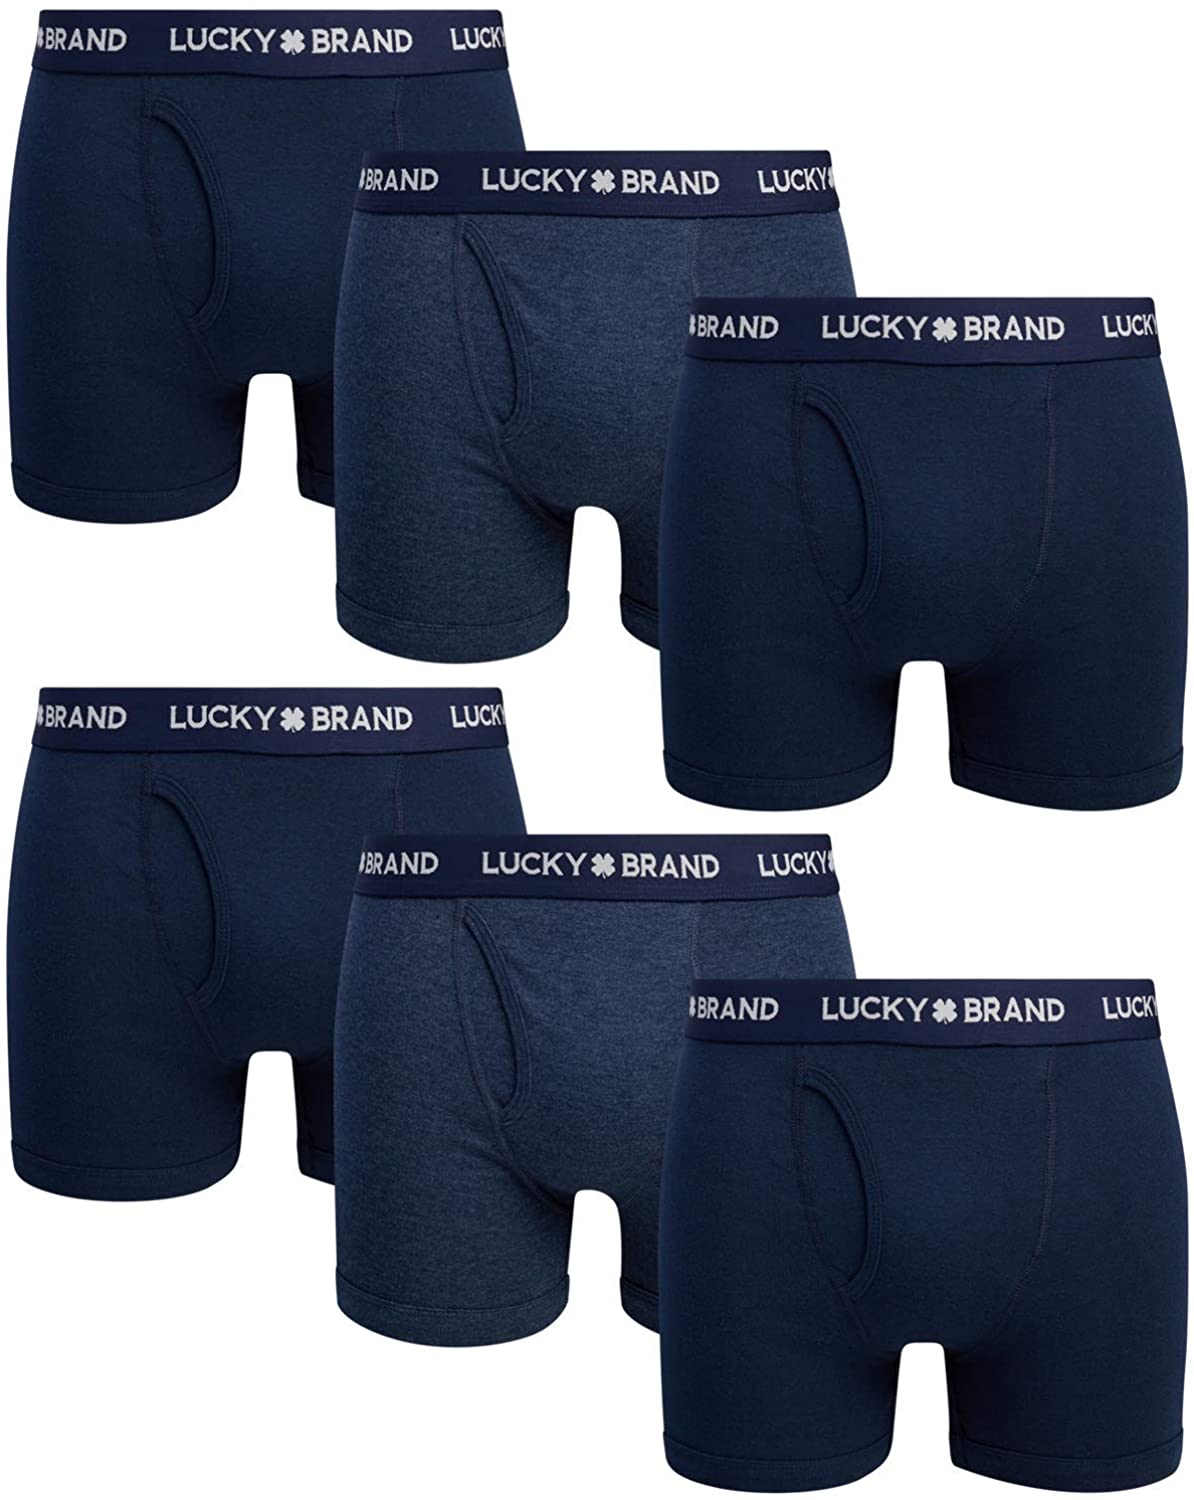 Lucky Brand Men's Underwear - Casual Stretch Boxer Briefs (3 Pack), Size  Small, Charcoal Heather Grey/Print/Grey at  Men's Clothing store